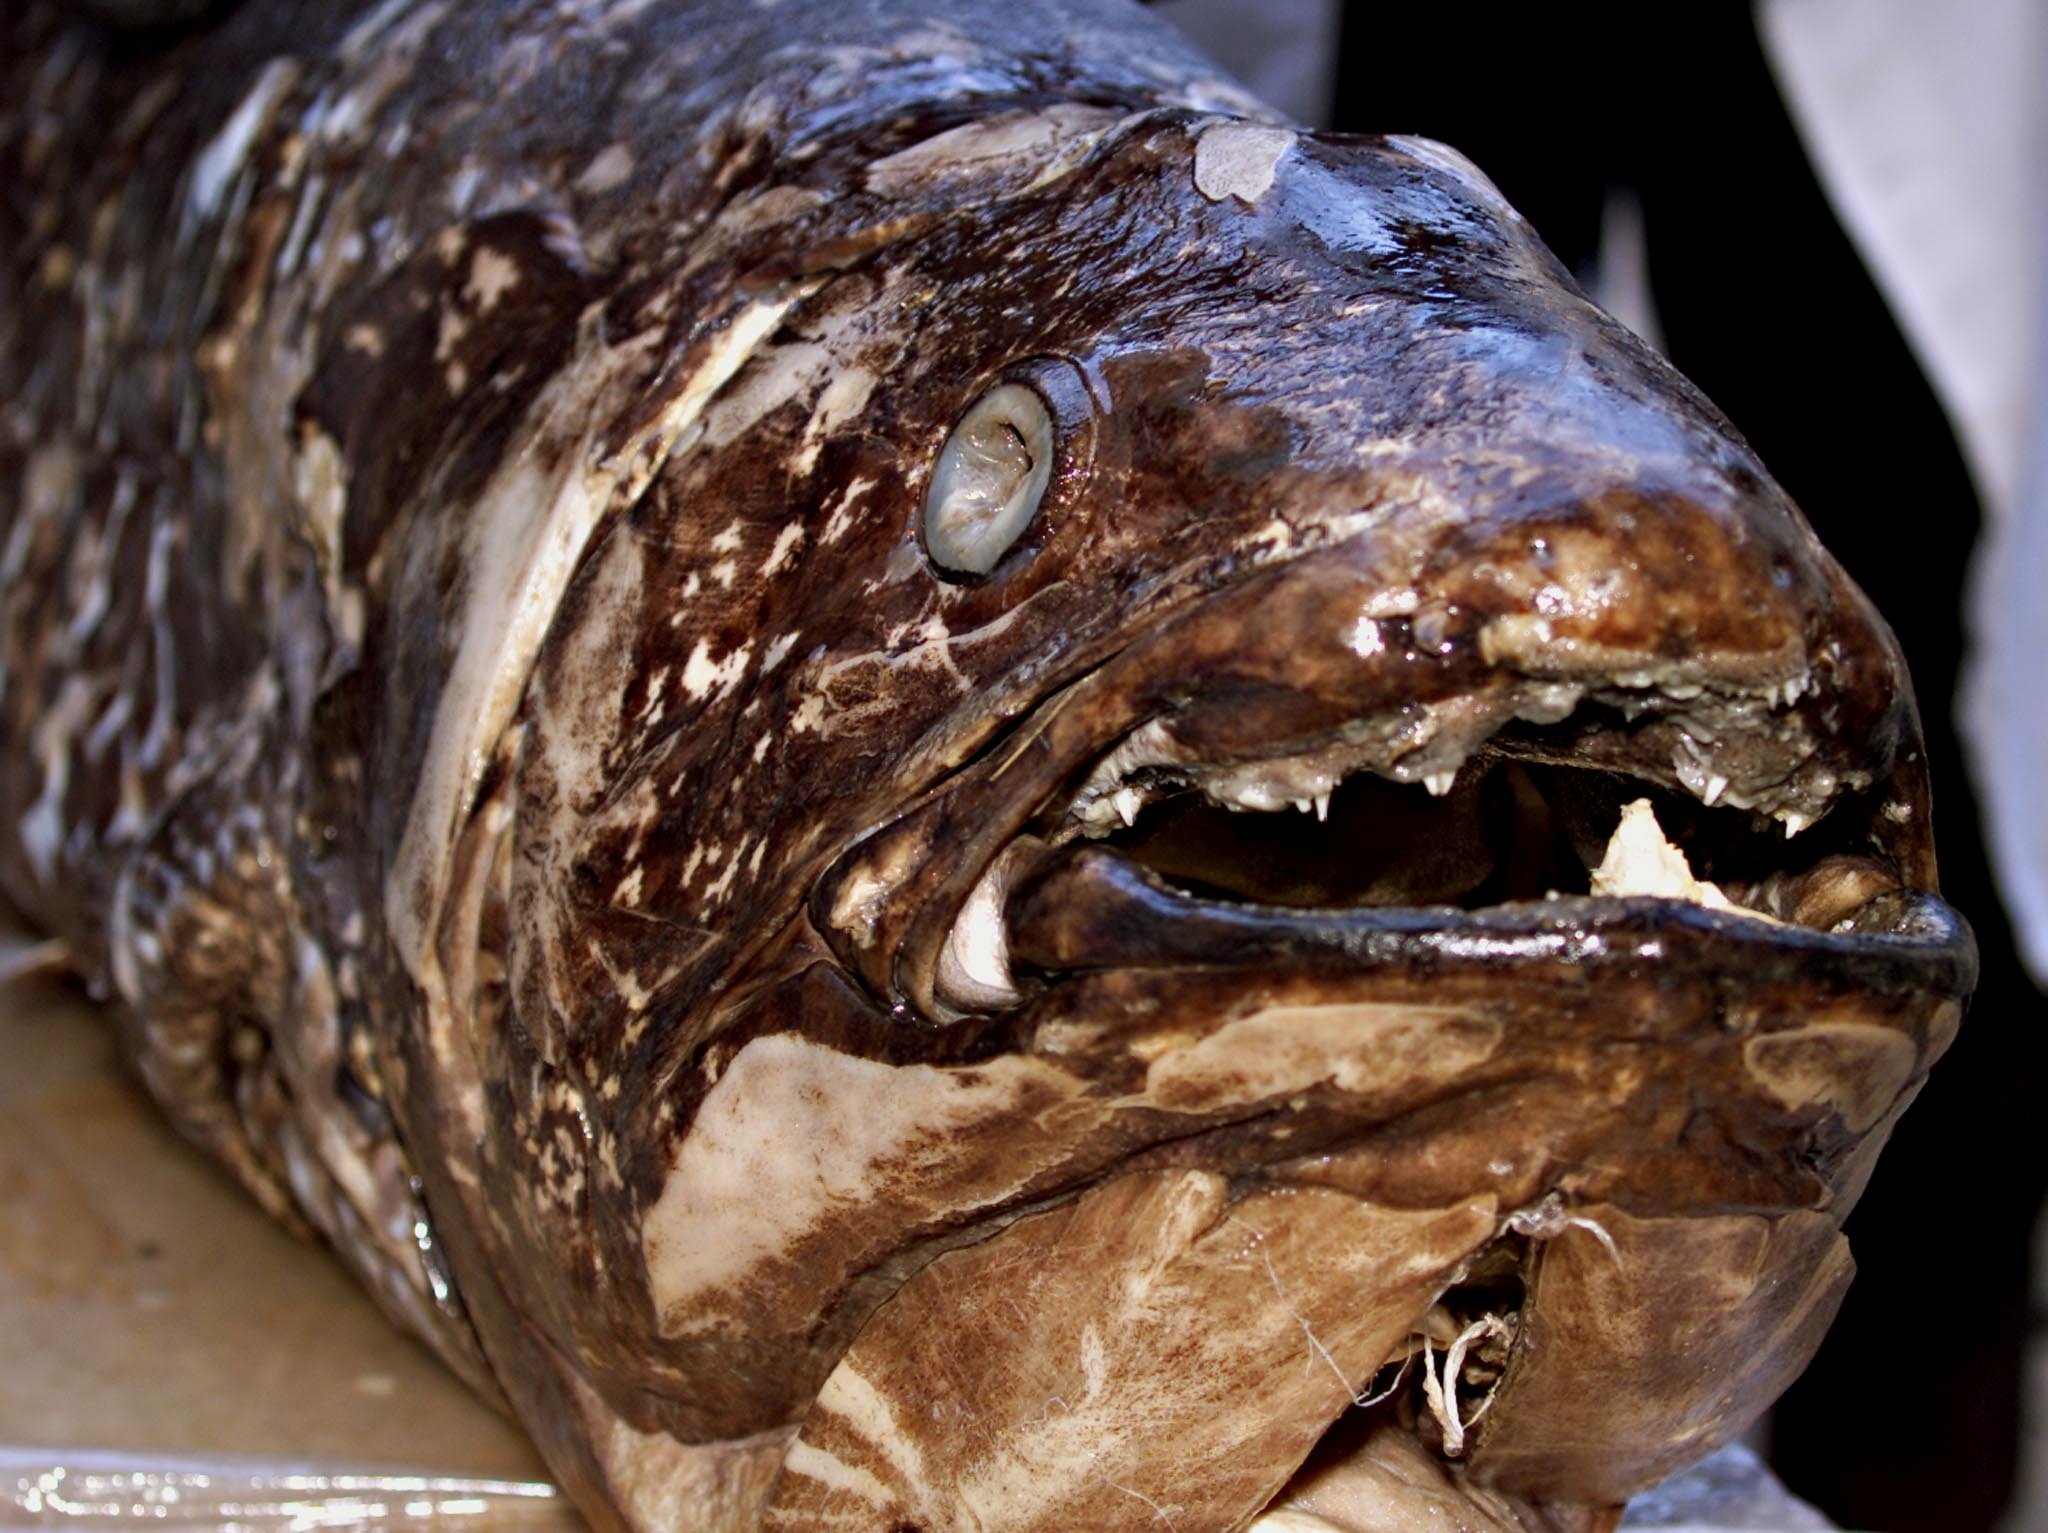 Department of fish studies personnel at the National Museum of Kenya displays a coelacanth weighing 77 kilograms (169 pounds) and measuring 1.7 meters (5.5 feet) that was caught by Kenyan fishermen in the coastal town of Malindi in April 2001, in Kenya
 Nov. 19, 2001. (Reuters File Photo)